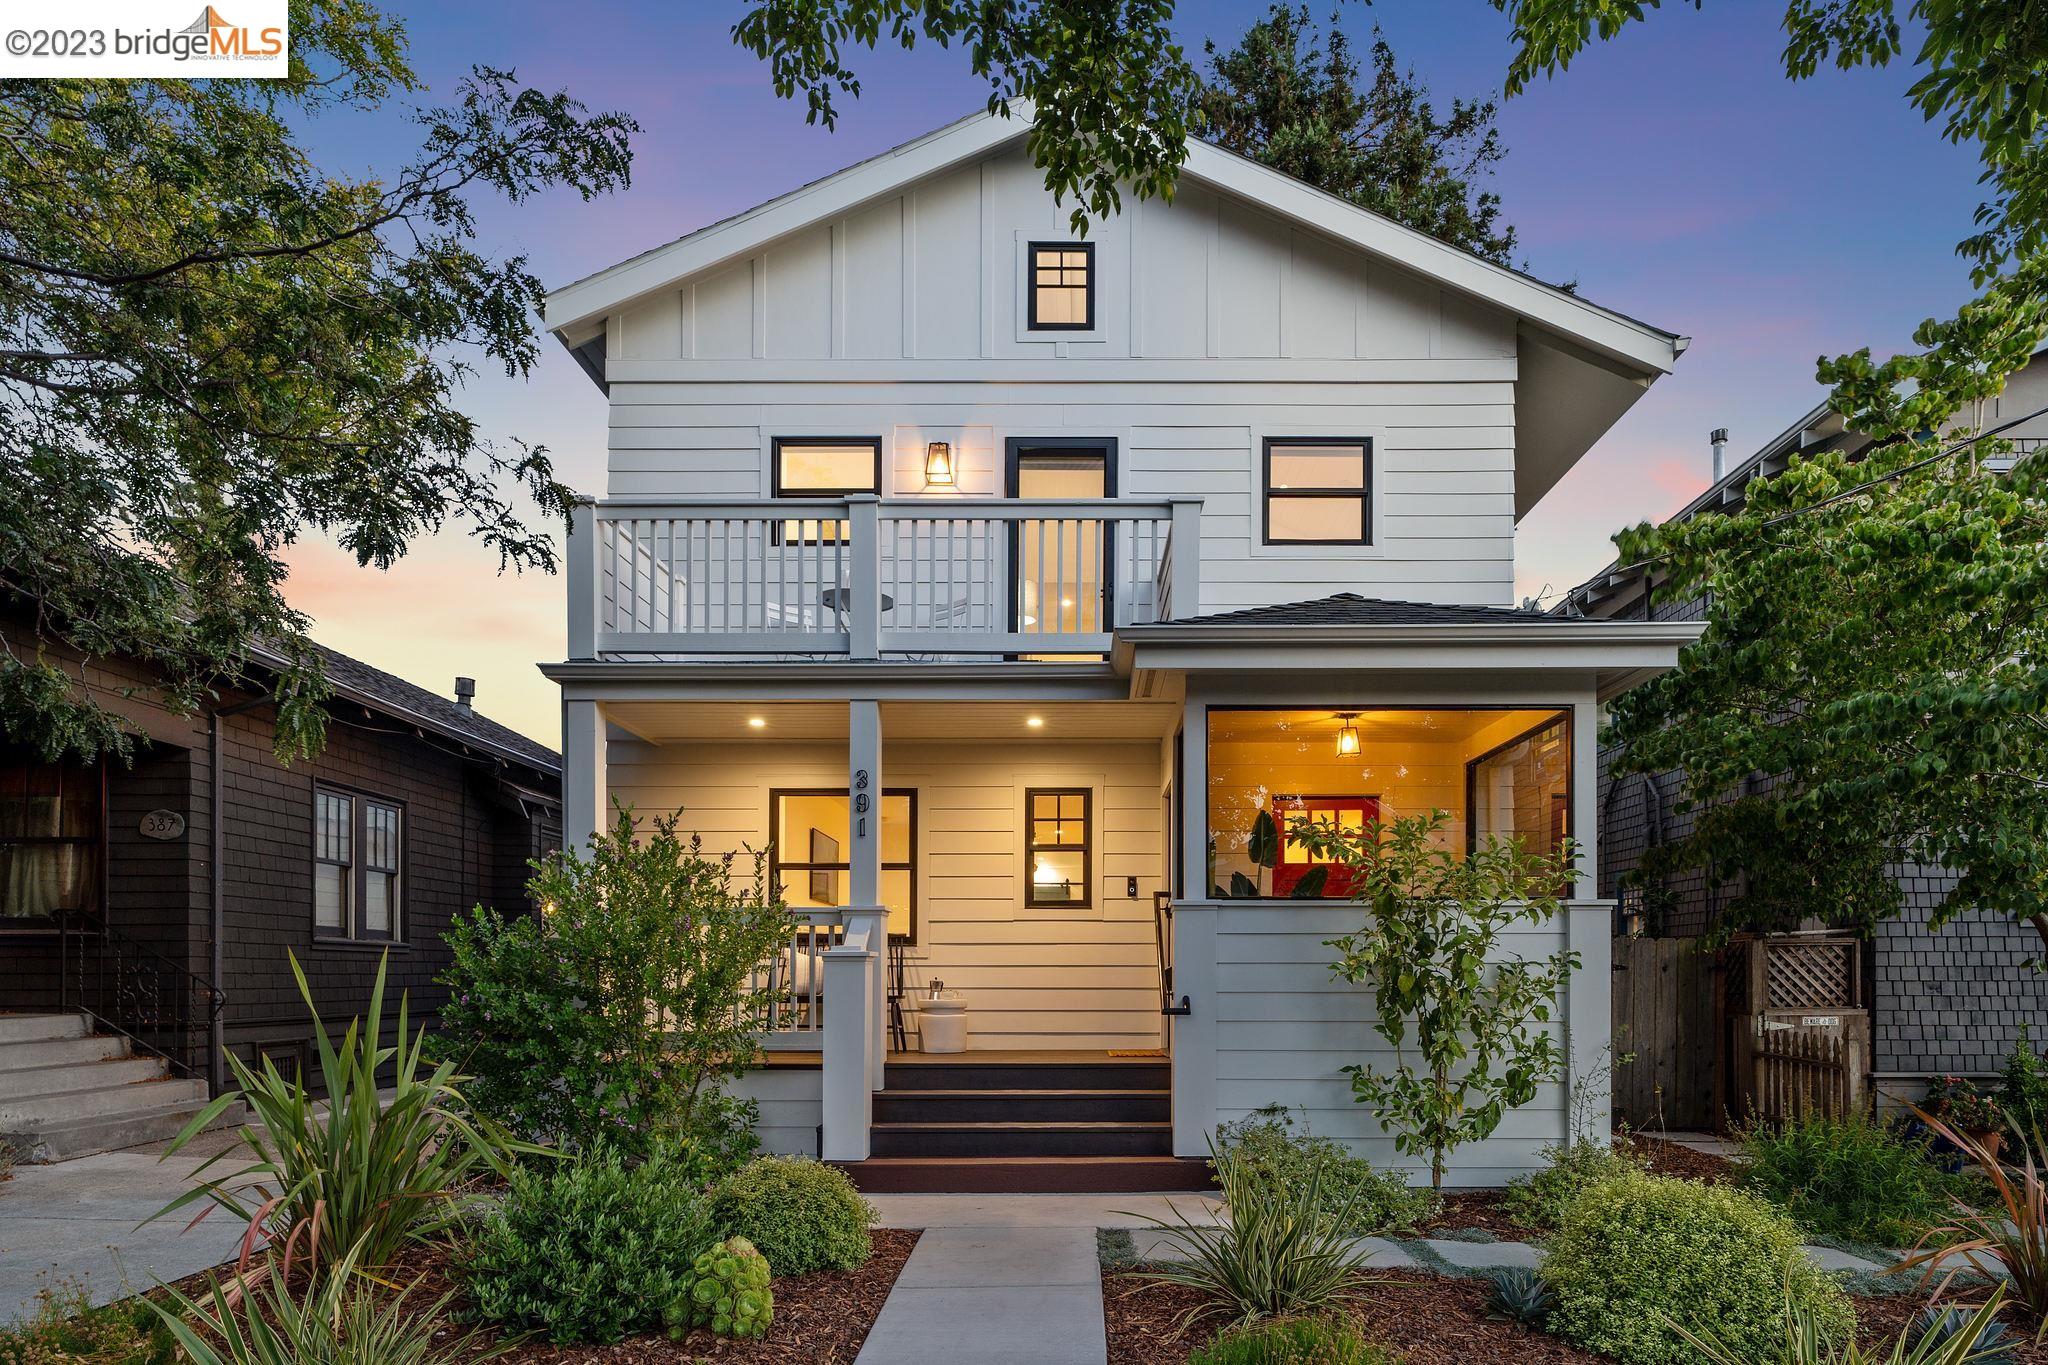 Striking Modern Farmhouse on one of Rockridge neighborhood’s best tree-lined blocks!  This one-of-a-kind, custom-built residence wows with its showstopping, picture-perfect curb appeal and thoughtfully designed interiors. The impressive remodel completed in 2021 rebuilt a modest bungalow from the ground up adding a full second story, new foundation, all new electrical, plumbing, exterior/interior finishes and much more.  The newly reconfigured home now boasts 4 bedrooms, 3.5 baths with all the modern conveniences you’ve been waiting for. At the rear is a private bedroom with large ensuite bath and walk-in closet perfect for accommodating visiting guests.  The upper level consists of three additional bedrooms, two full bathrooms plus laundry room. The master bedroom is a glamorous retreat with soaring wood-clad ceilings, ensuite master bath, an incredible walk-in closet and its own private deck.  The backyard is a sweet, low-maintenance space for relaxing, gardening, and playtime activities. Located in the coveted Rockridge neighborhood near Colby Park and top-rated Peralta Elementary School. Just steps from College Ave shops, restaurants, cafés, Market Hall groceries and more.  Near Rockridge BART, fwys 580,24, hwy 13 just mins away. Walk Score 93, Bike Score 97.